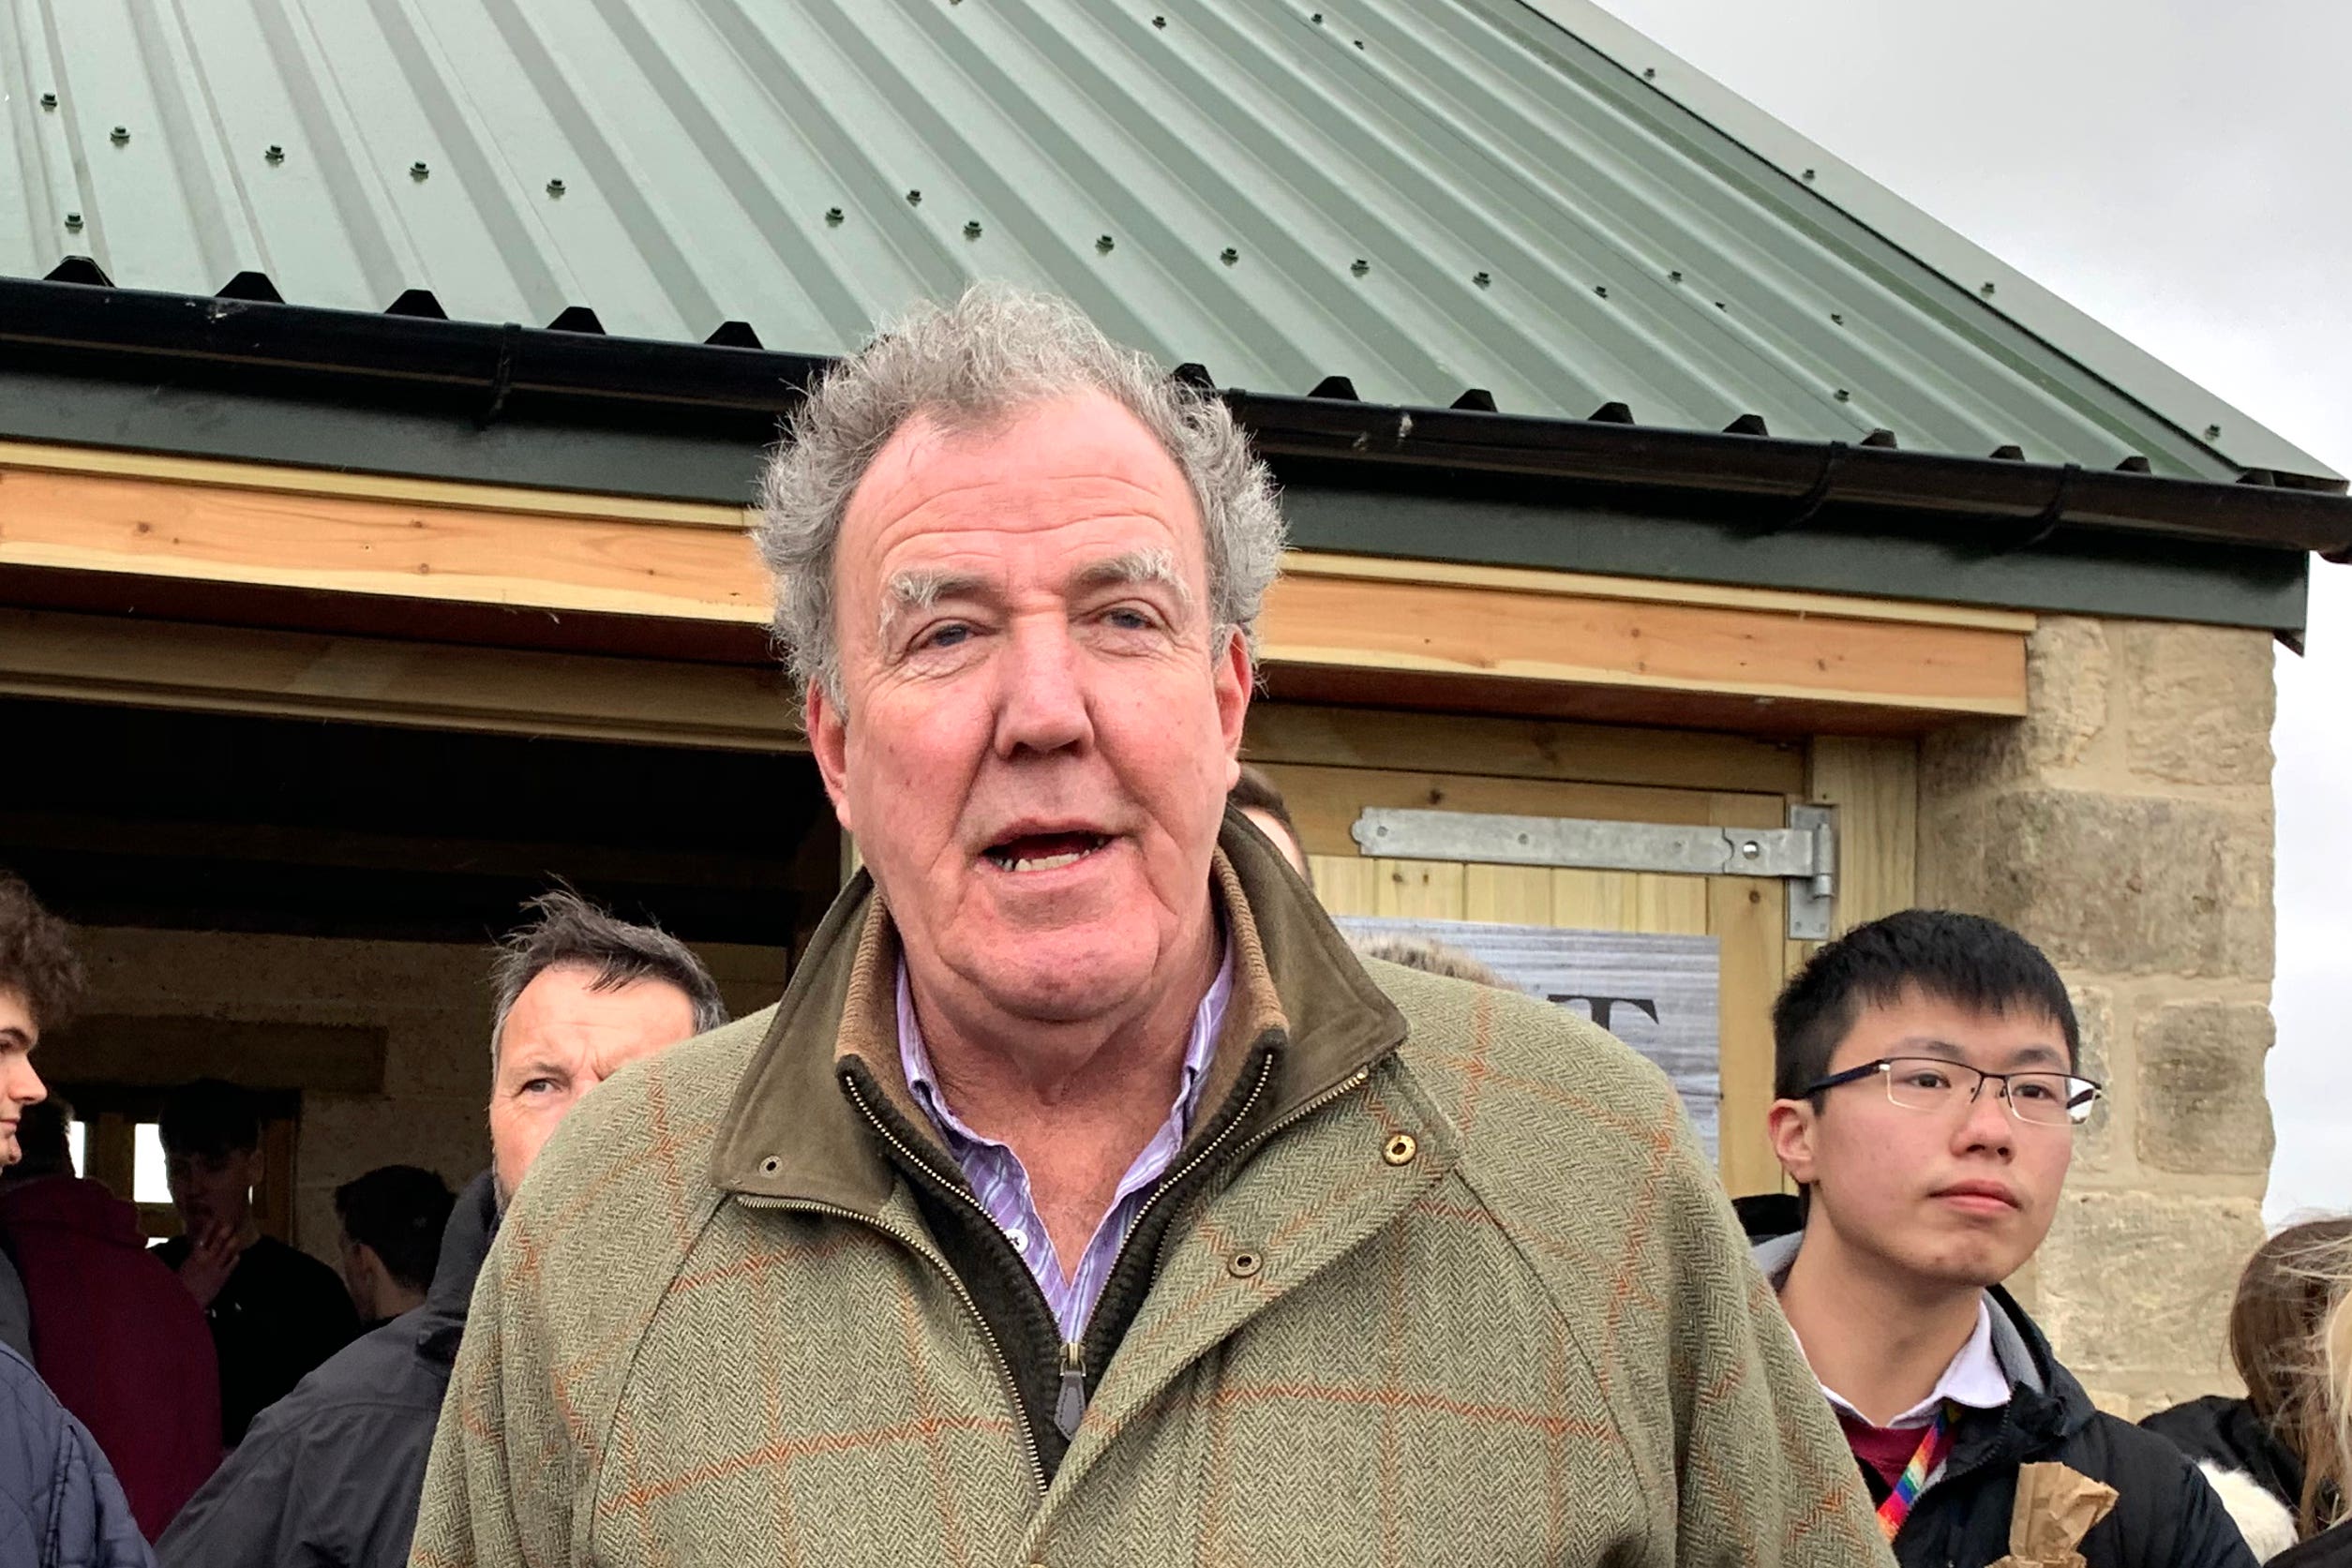 Ipso received more than 20,000 complaints over Jeremy Clarkson’s article in ‘The Sun’